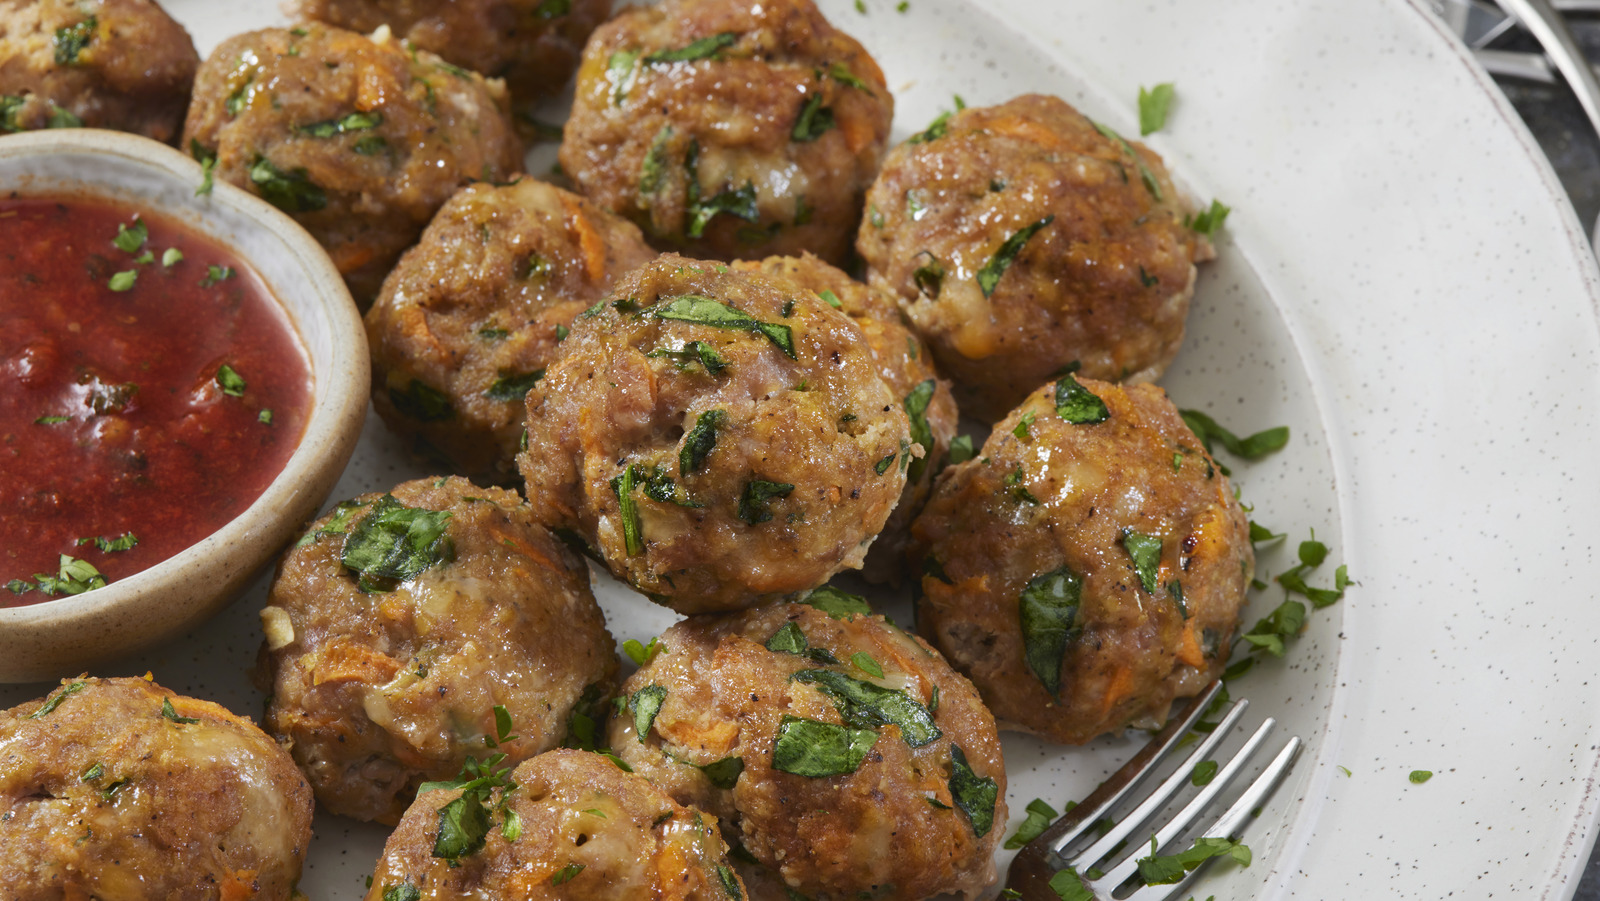 The Ingredient To Add A World Of Flavor To Turkey Meatballs